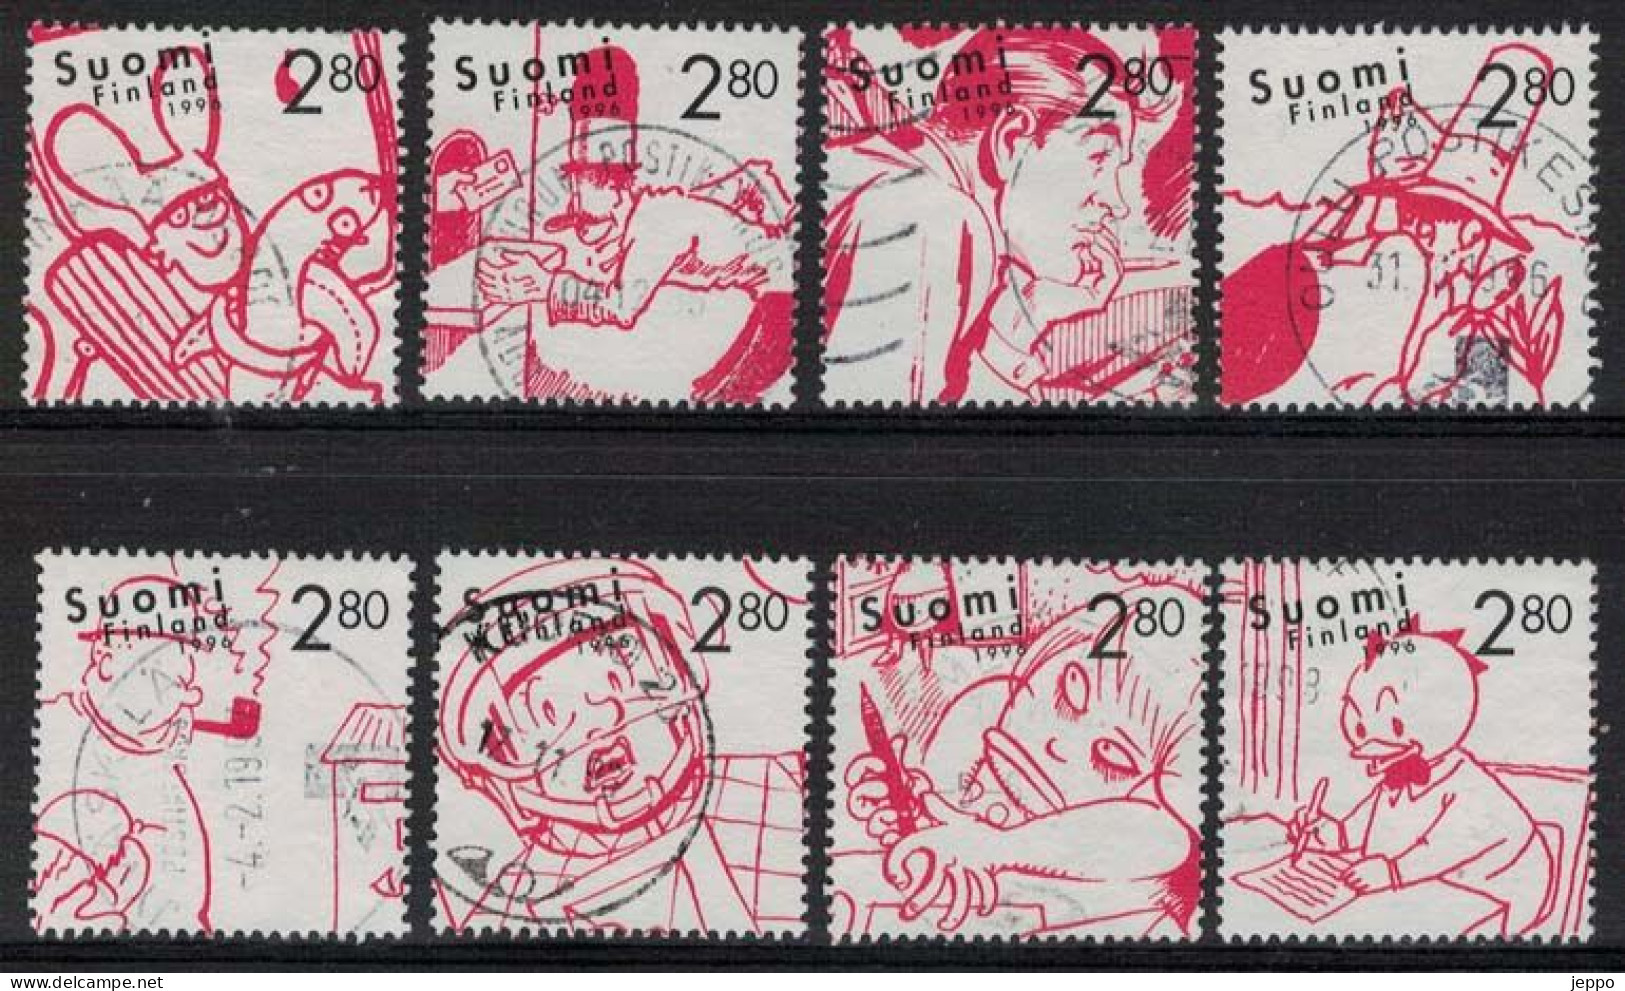 1996 Finland, Cartoons 100 Years Complete Set Used. - Used Stamps